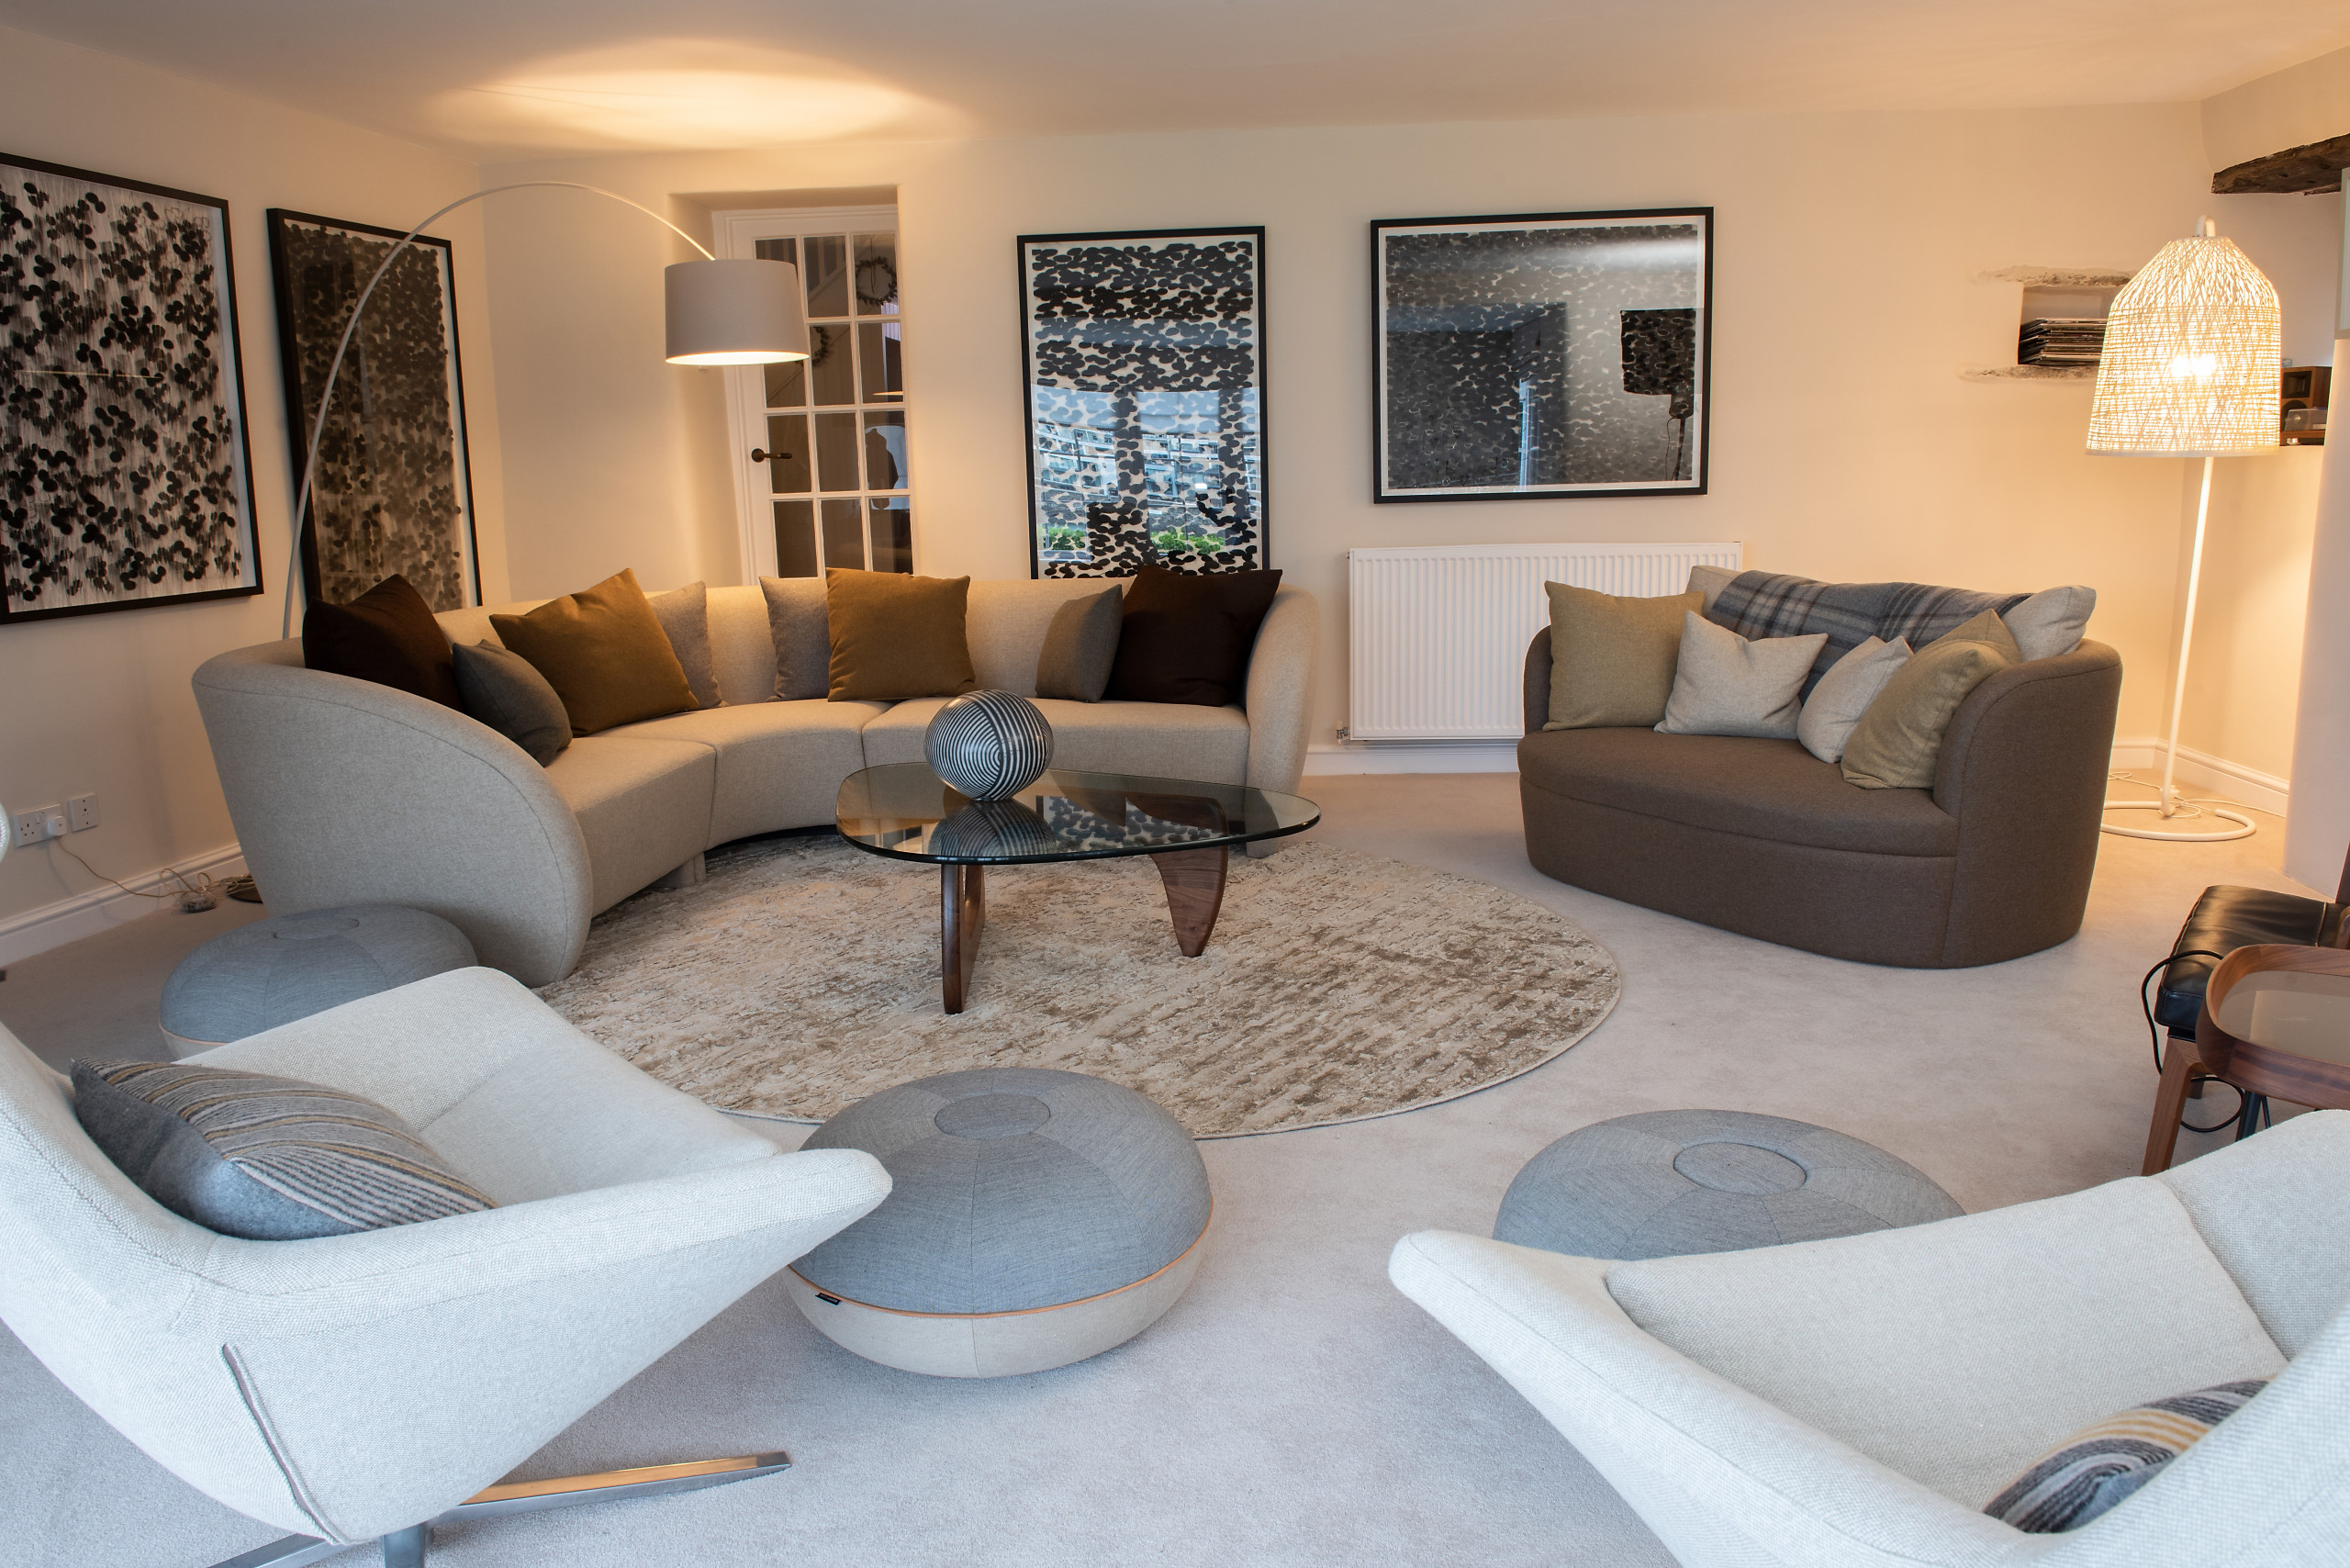 My clients Living Room in East Portlemouth. The sofa and love seat were made in Exeter, to my design by one of my bespoke upholstery manufacturers.